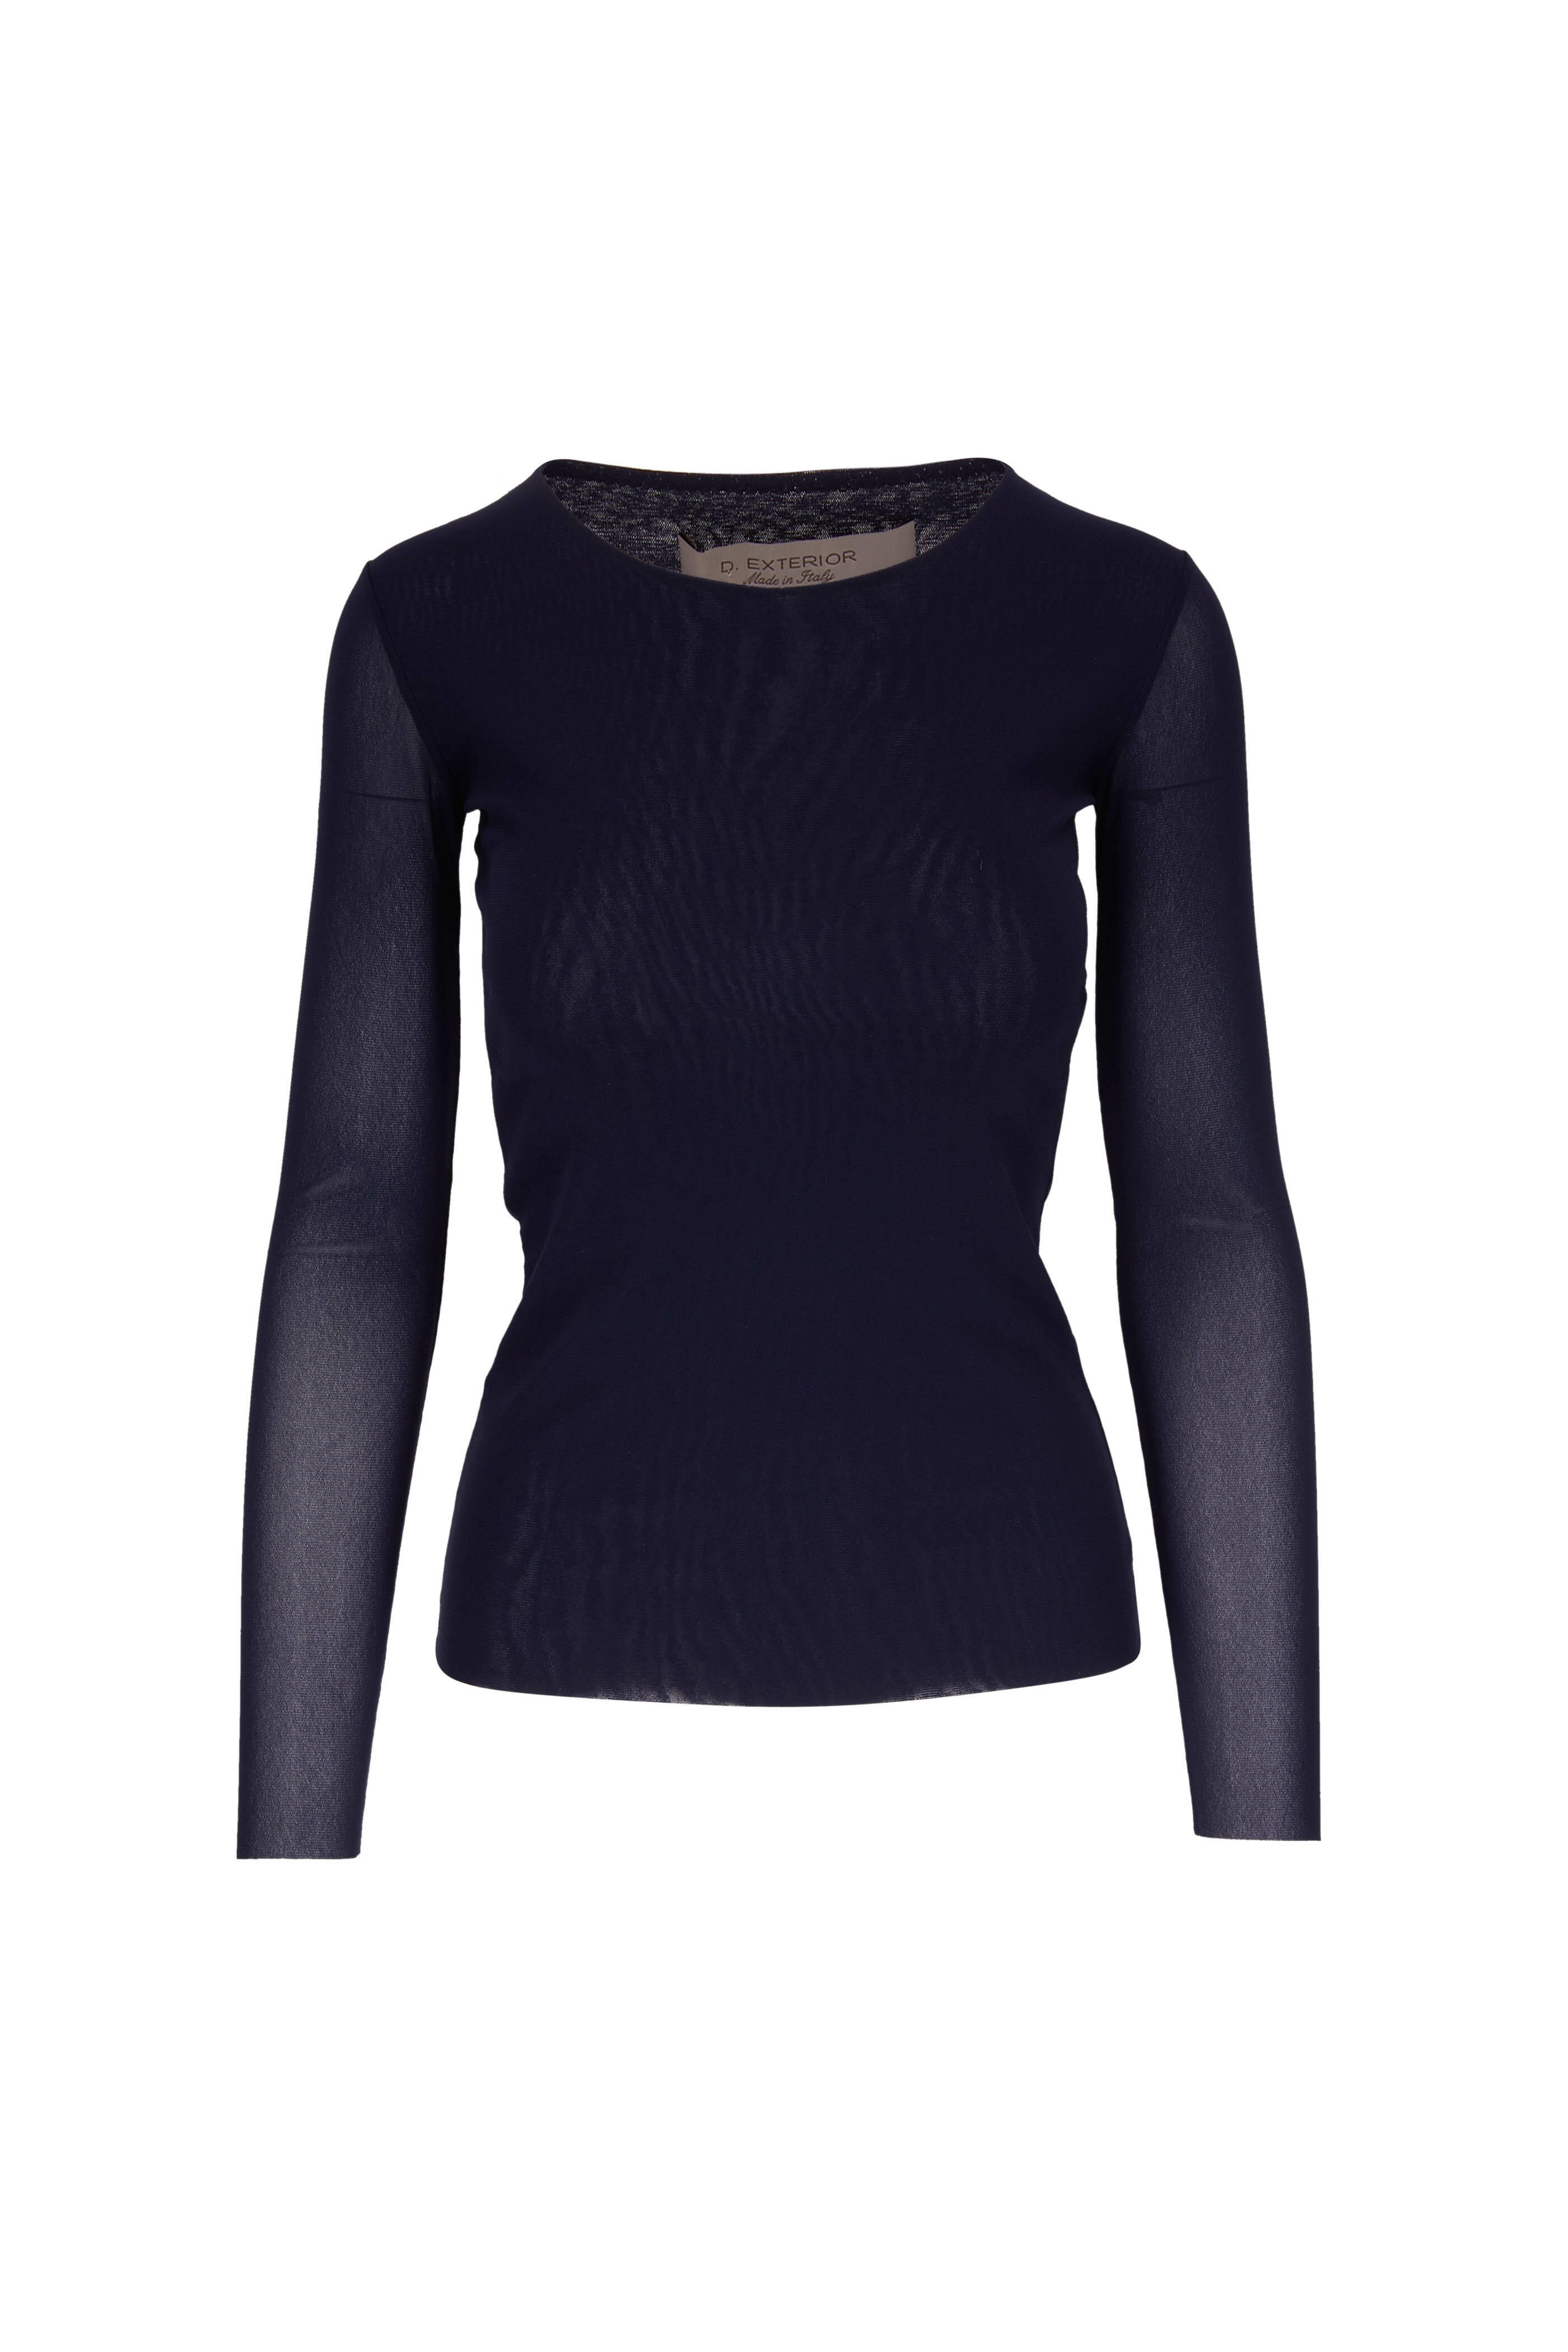 D.Exterior - Navy Blue Mesh Long Sleeve Top | Mitchell Stores